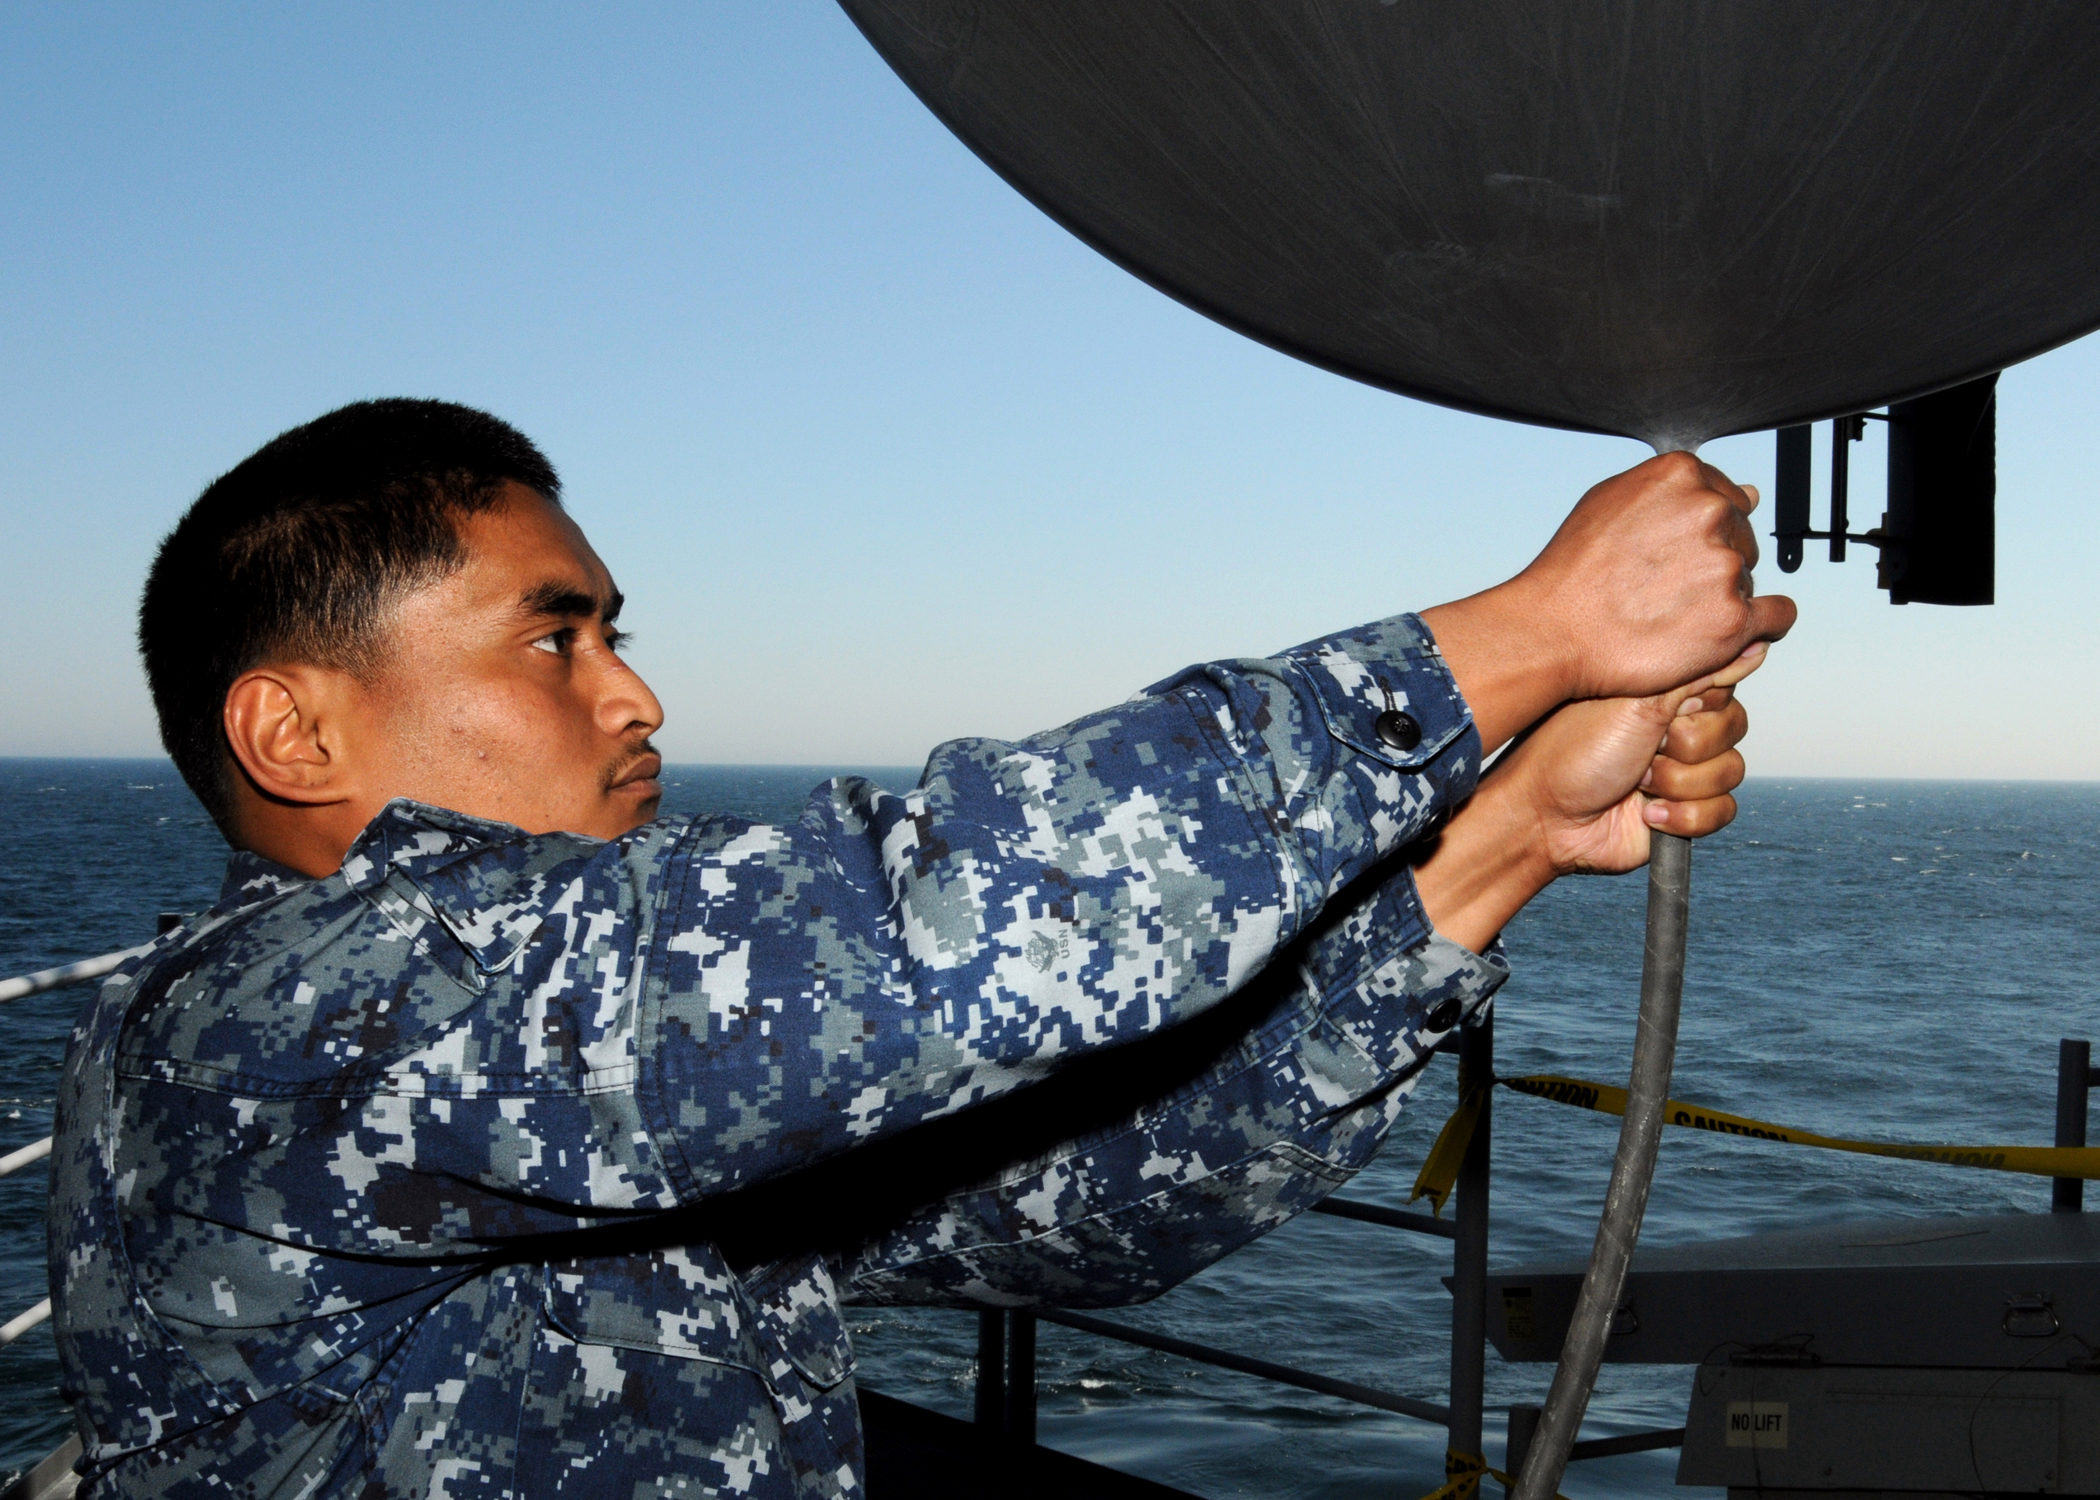 US Navy 100324-N-6509M-016 Aerographer's Mate Airman Apprentice Dante J. Blesoch prepares to release a weather balloon o analyze atmospheric pressure and temperature